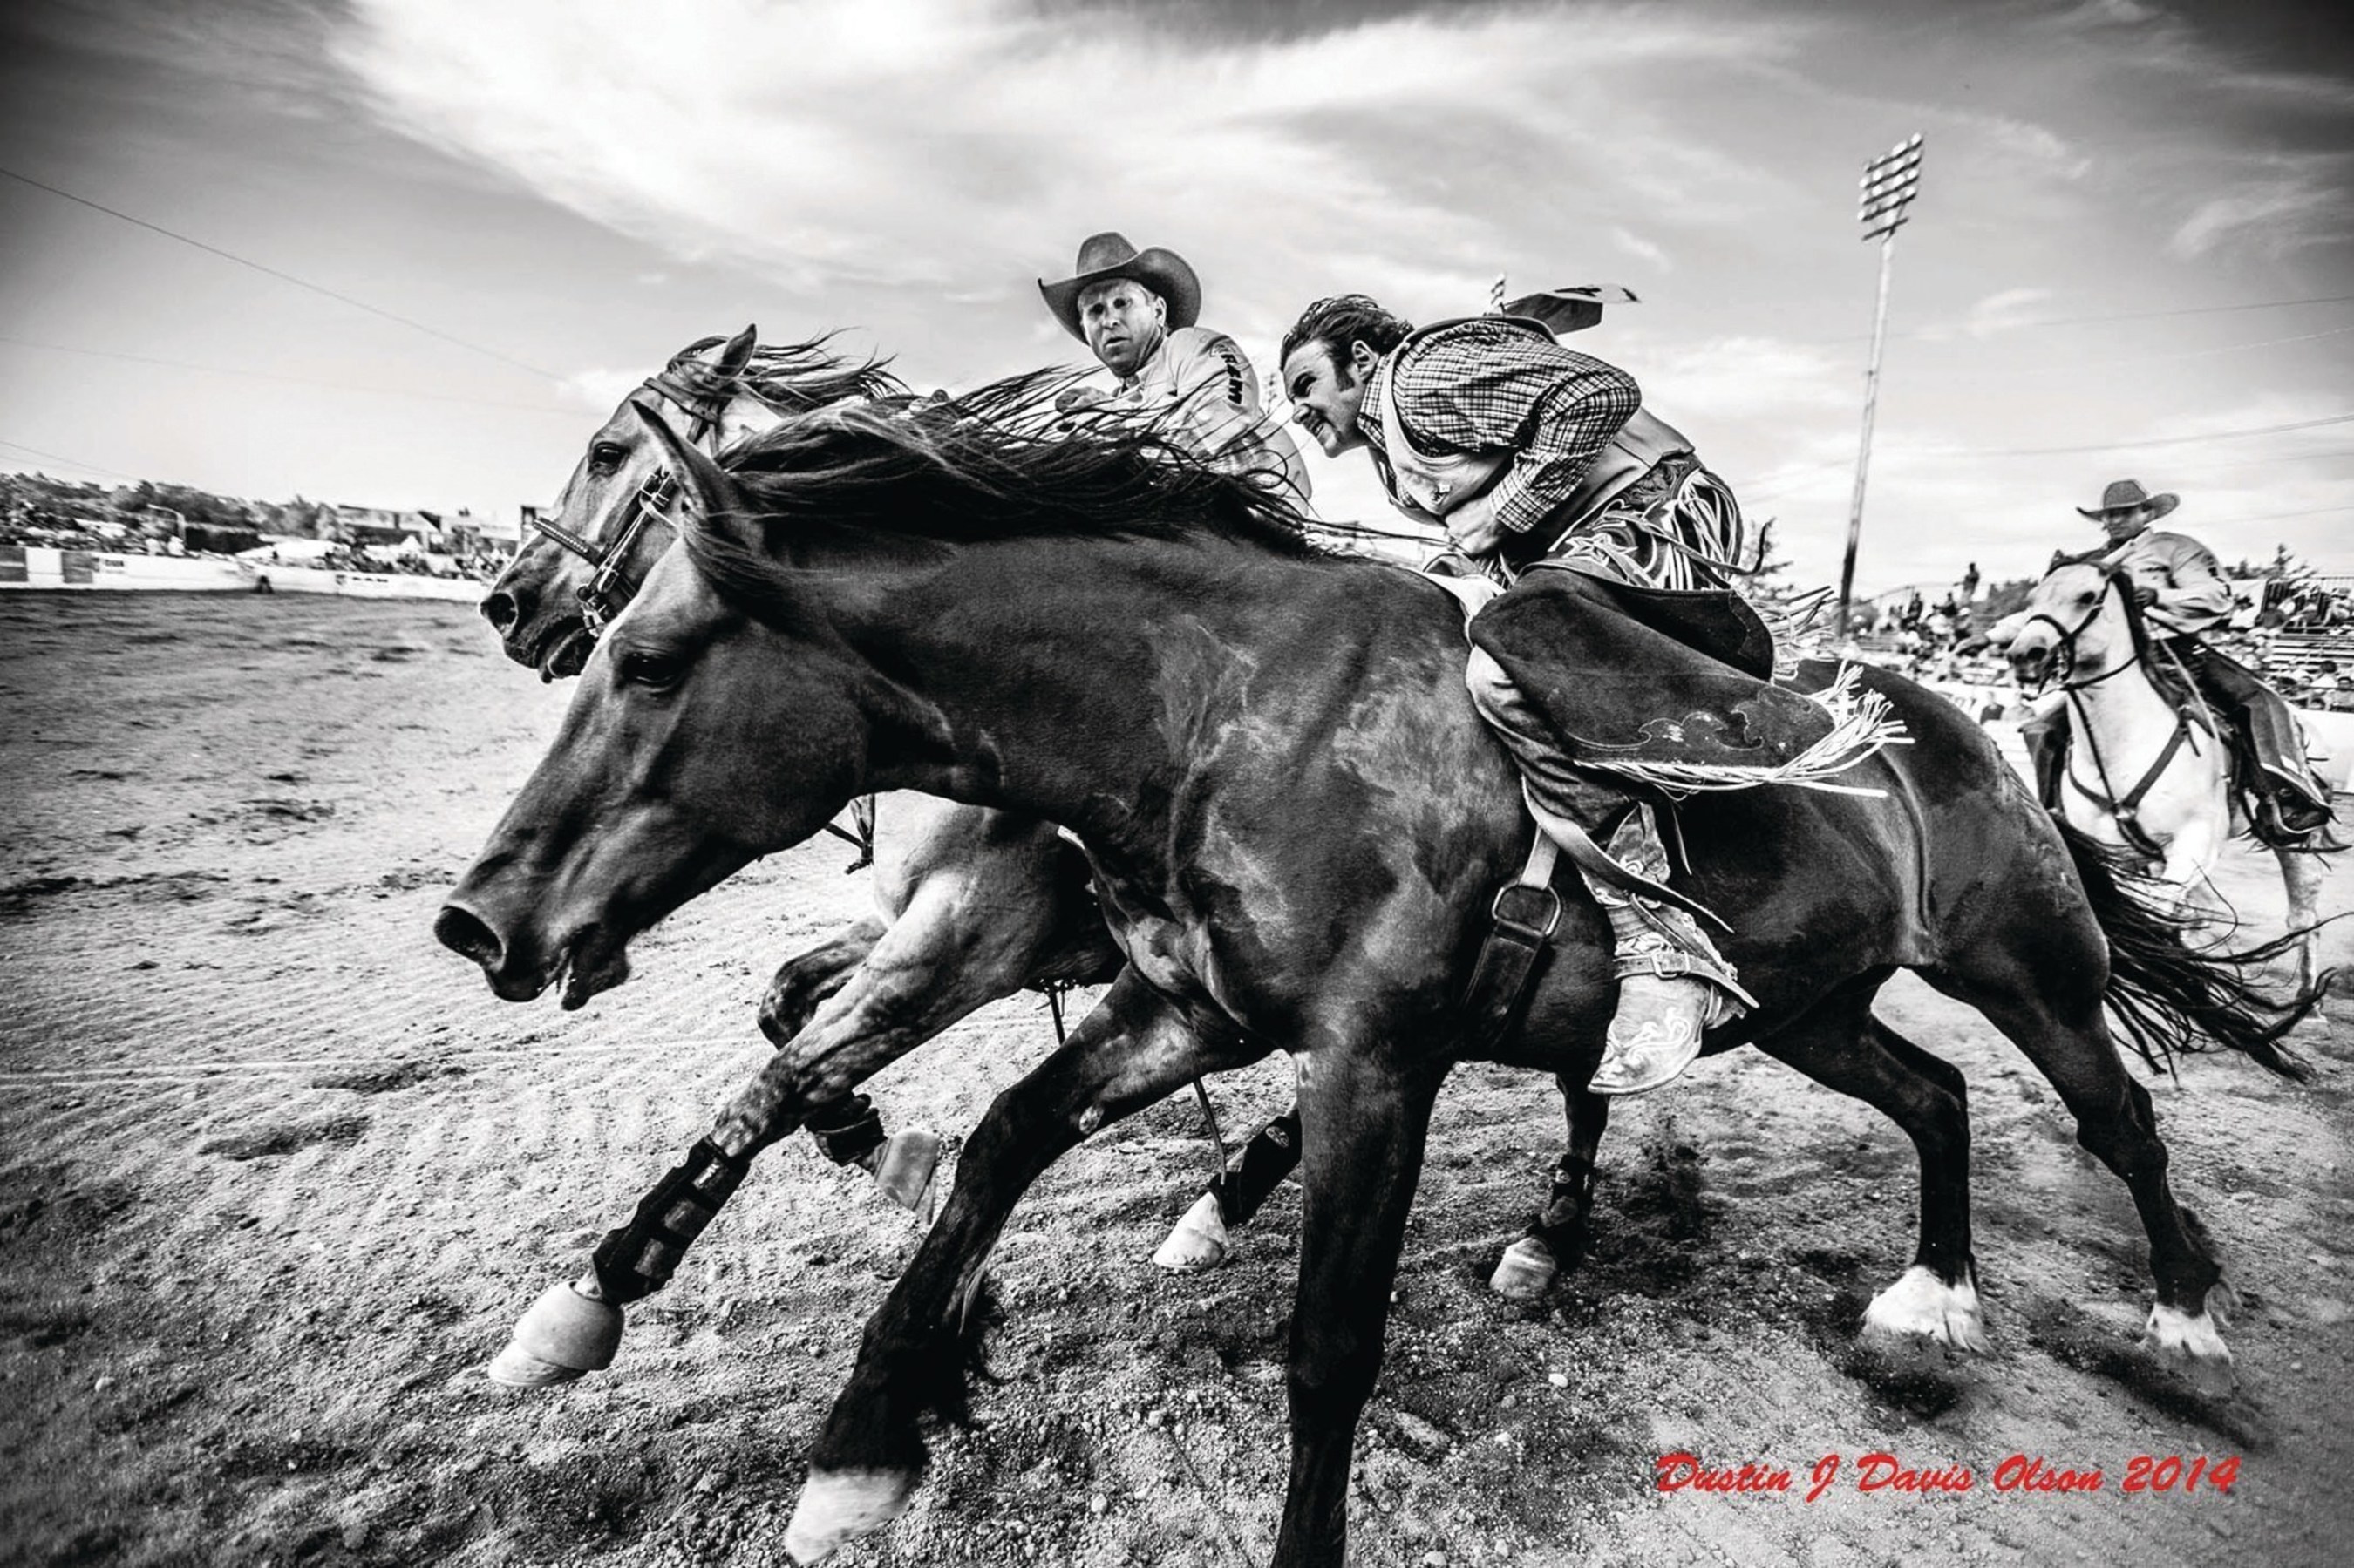 The Resort at Paws Up in Montana Hosts 2016 Cowboy Experience